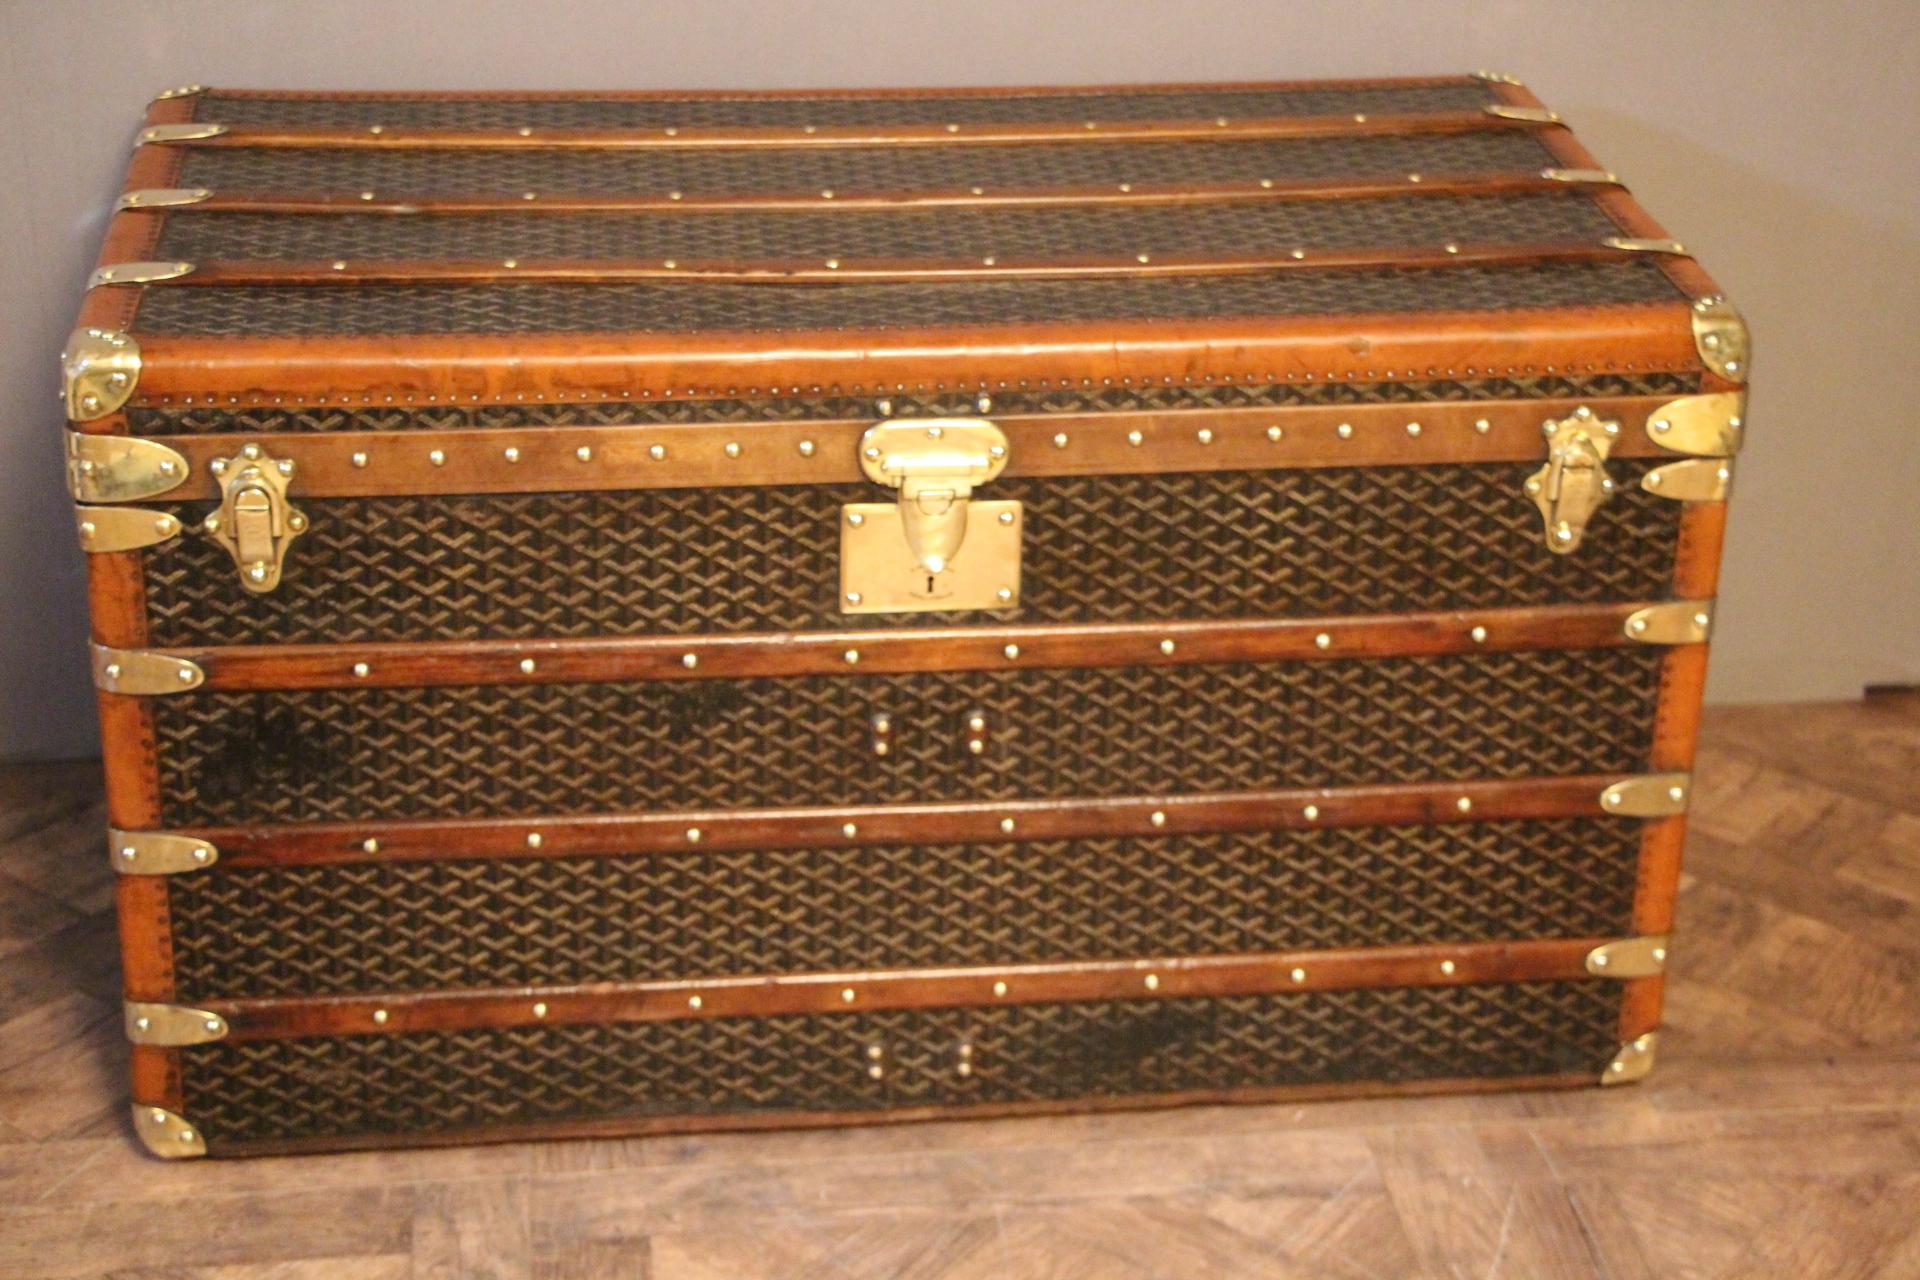 This Aine Goyard trunk has got very nice proportions as well as a beautiful, warm patina.
It features its famous and sought after chevron canvas, its original brass stamped lock, brass stamped clasps and brass stamped handles. Honey color lozine